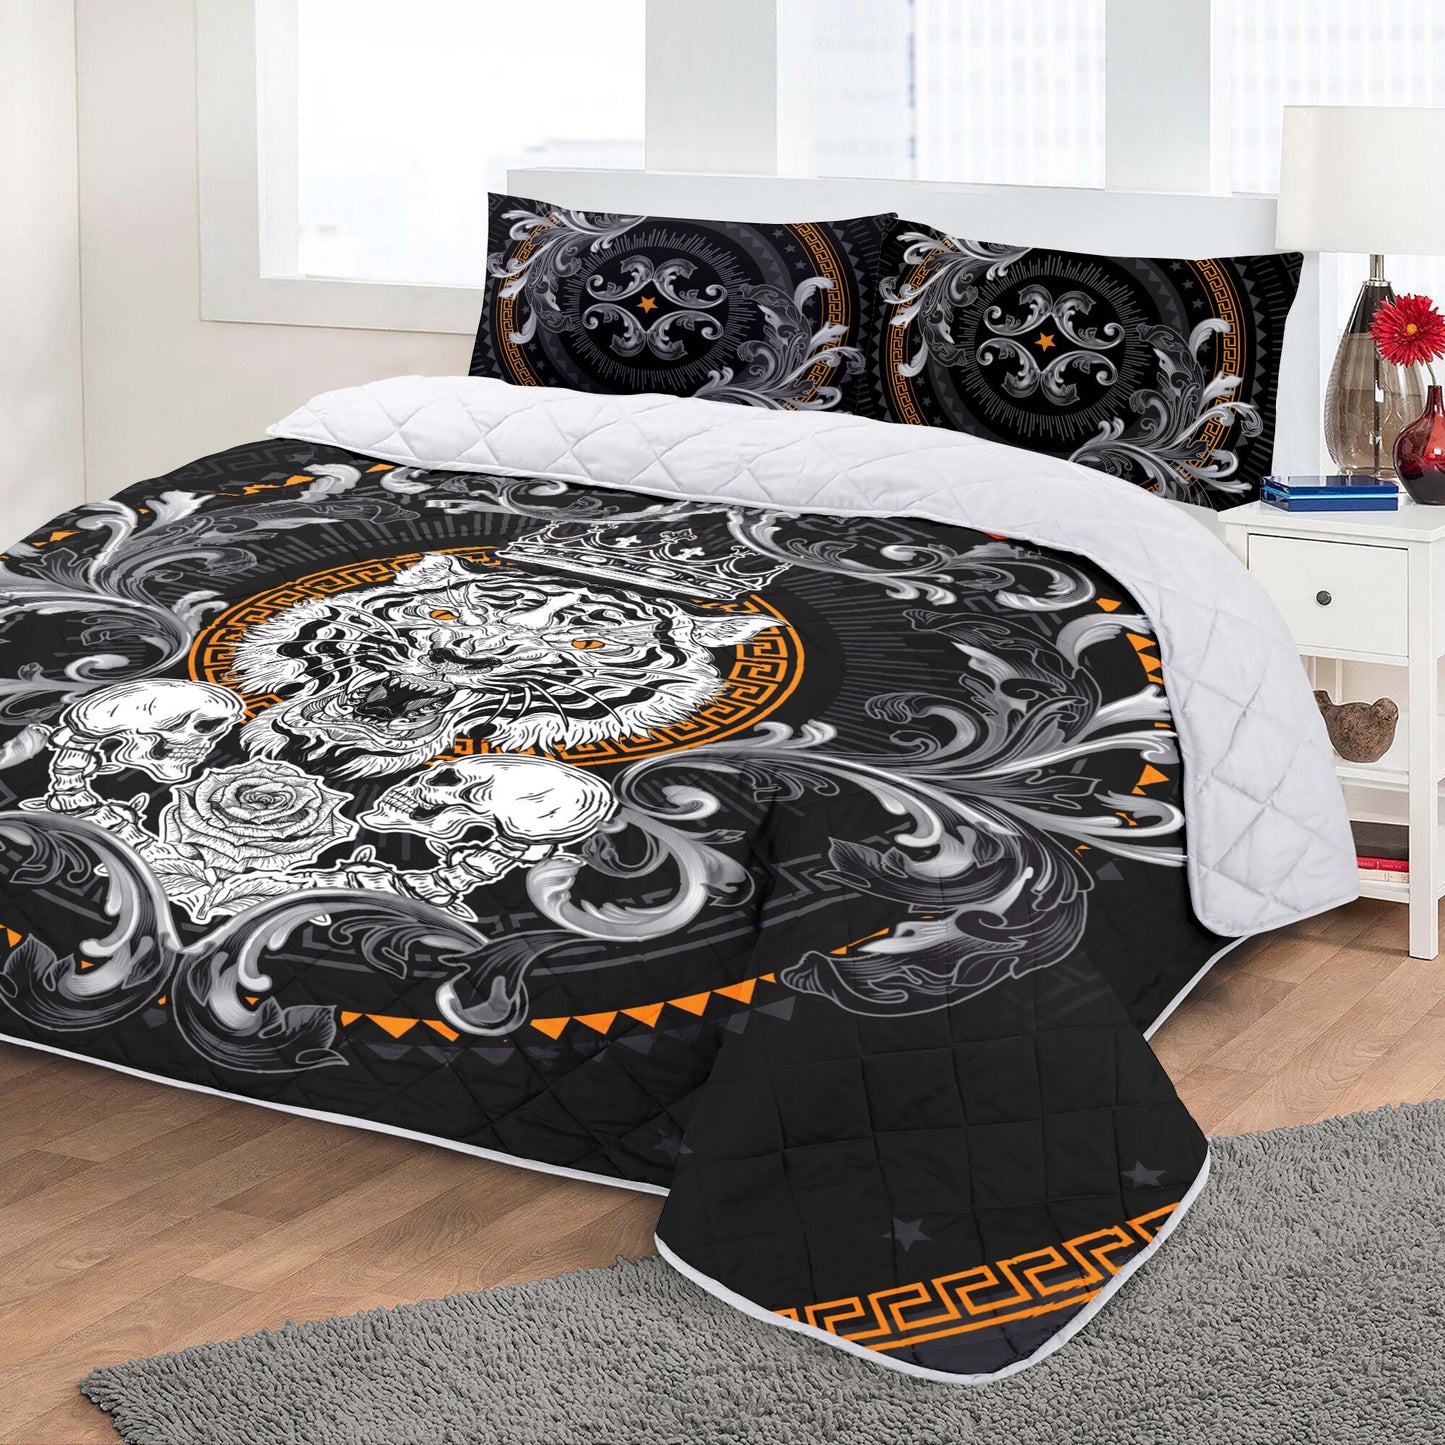 Baroque Skull Tiger Gothic Eccentric Personalised designs Blanket Bedspread Thin quilt • bedspread • blanket for your bedroom decoration